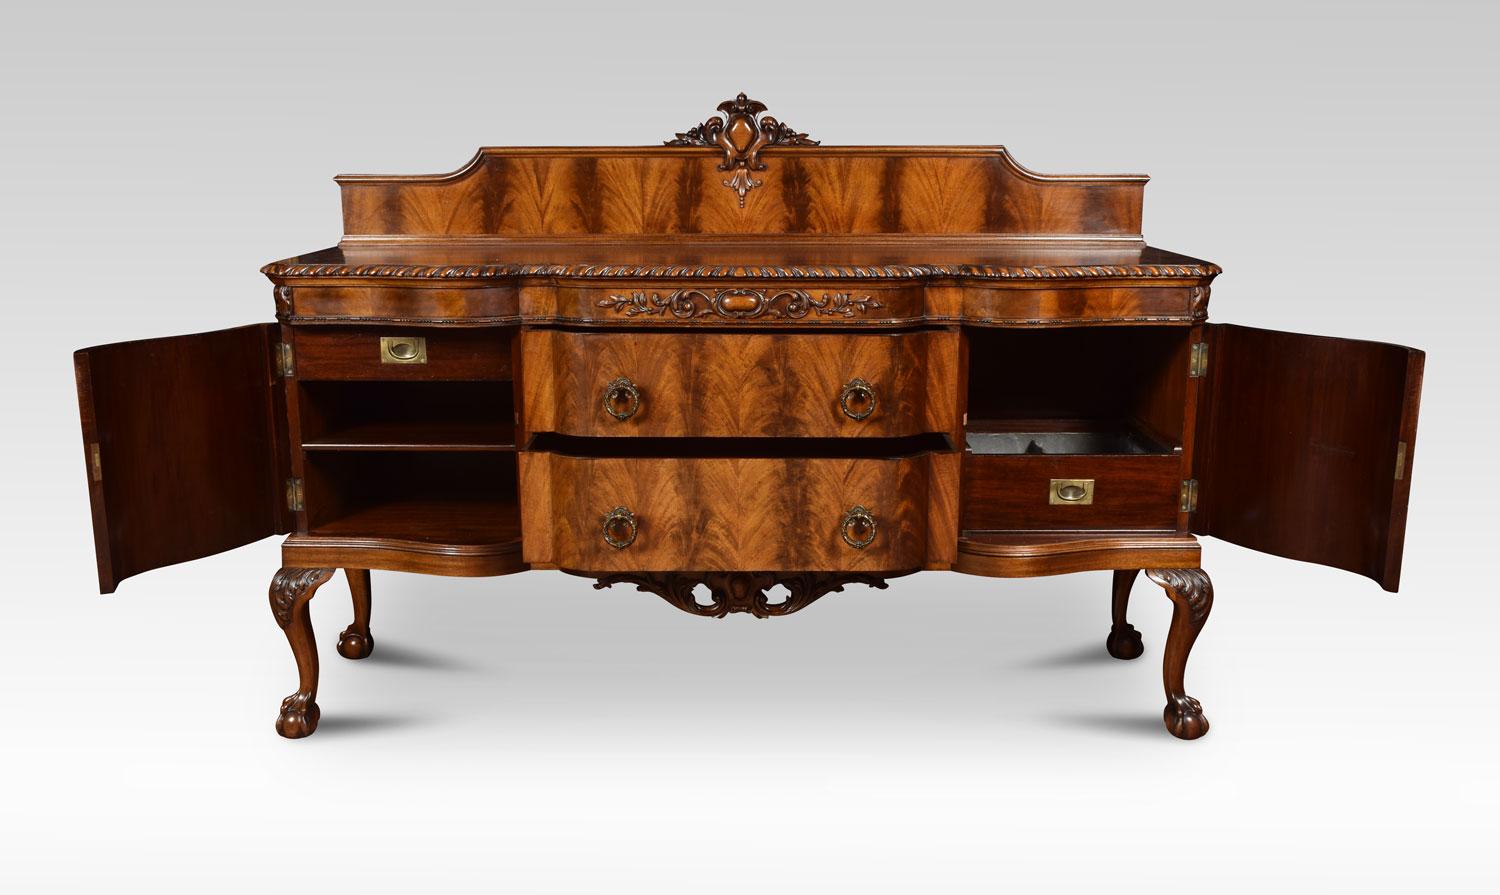 Flame mahogany sideboard. The raised back with central carved motif, above the large breakfront top with gadroon carved edge. The sideboard is fitted with three central draws having tooled brass handles and mahogany draw liners. Flanked by cupboard